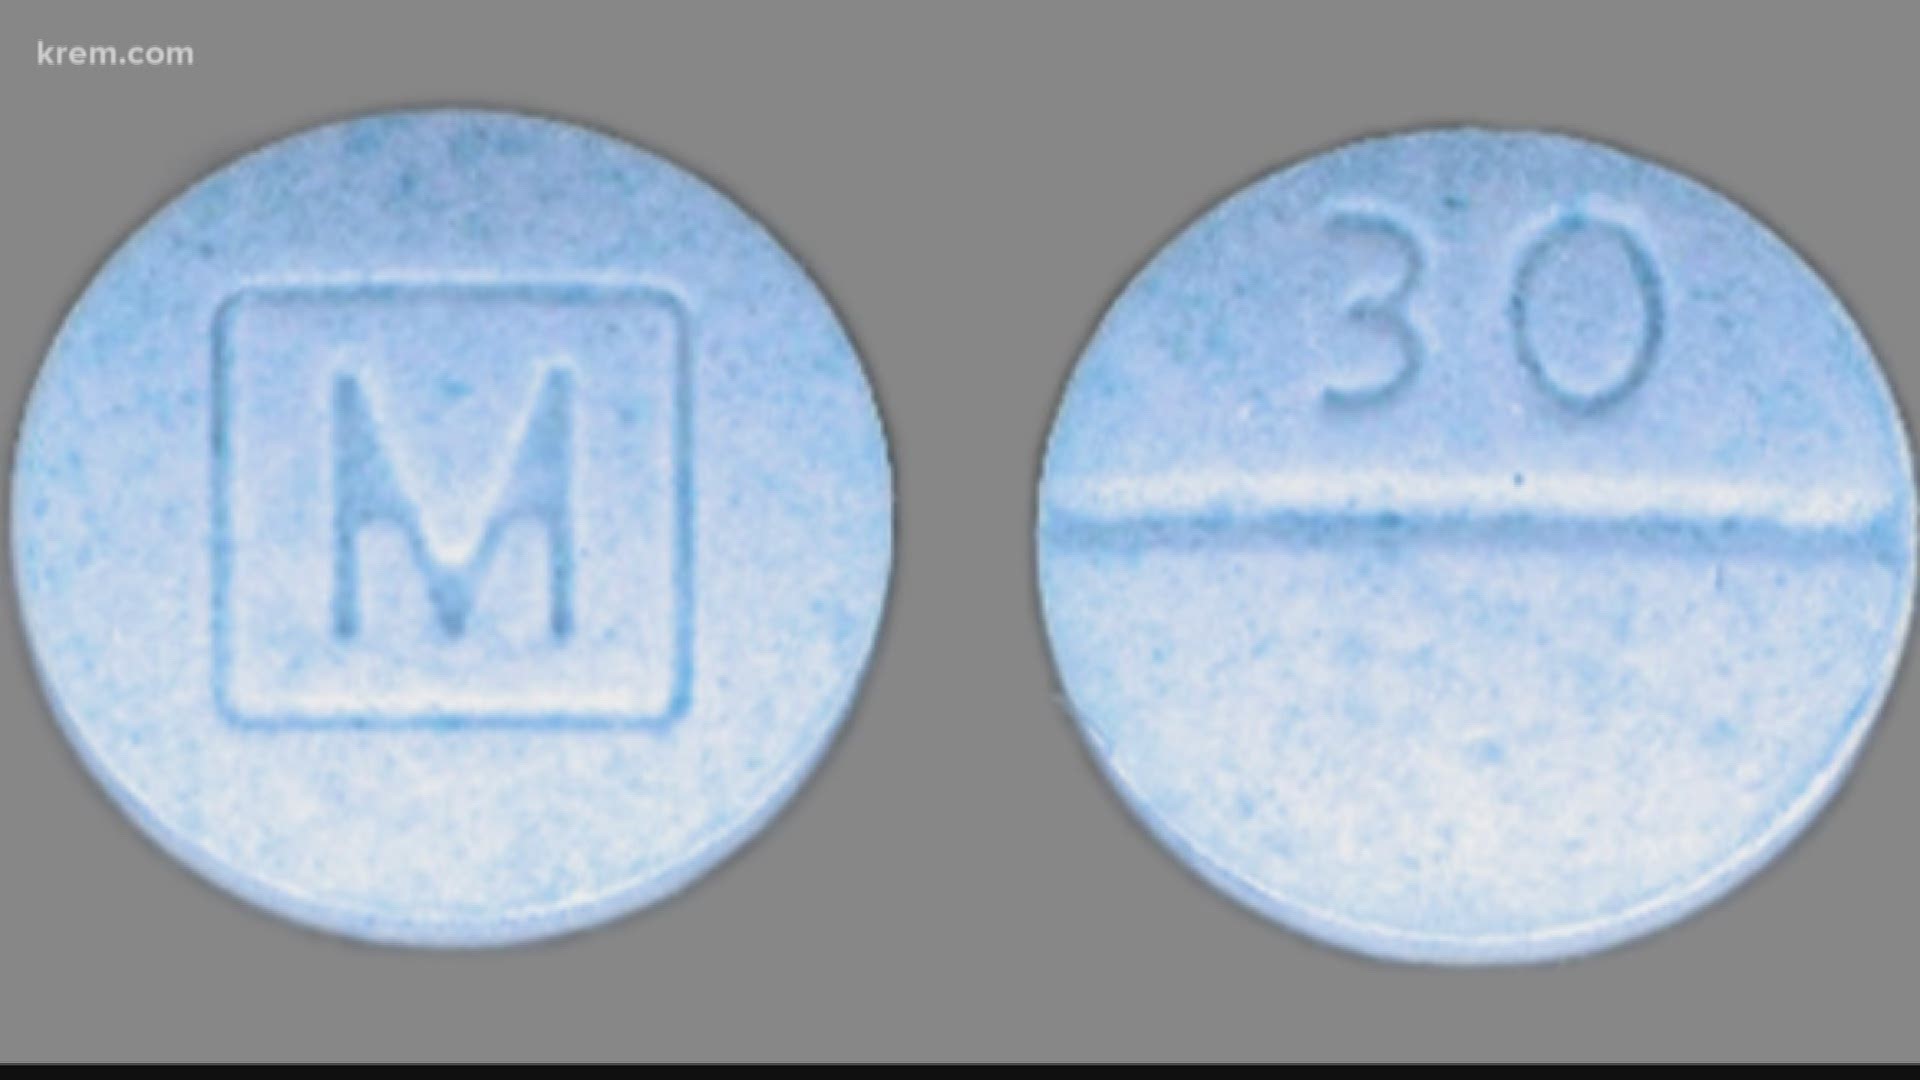 Fentanyl pills disguised as Oxycontin caused the deaths of 3 western Washington teens in recent weeks. Spokane health officials warn everyone to stay away.